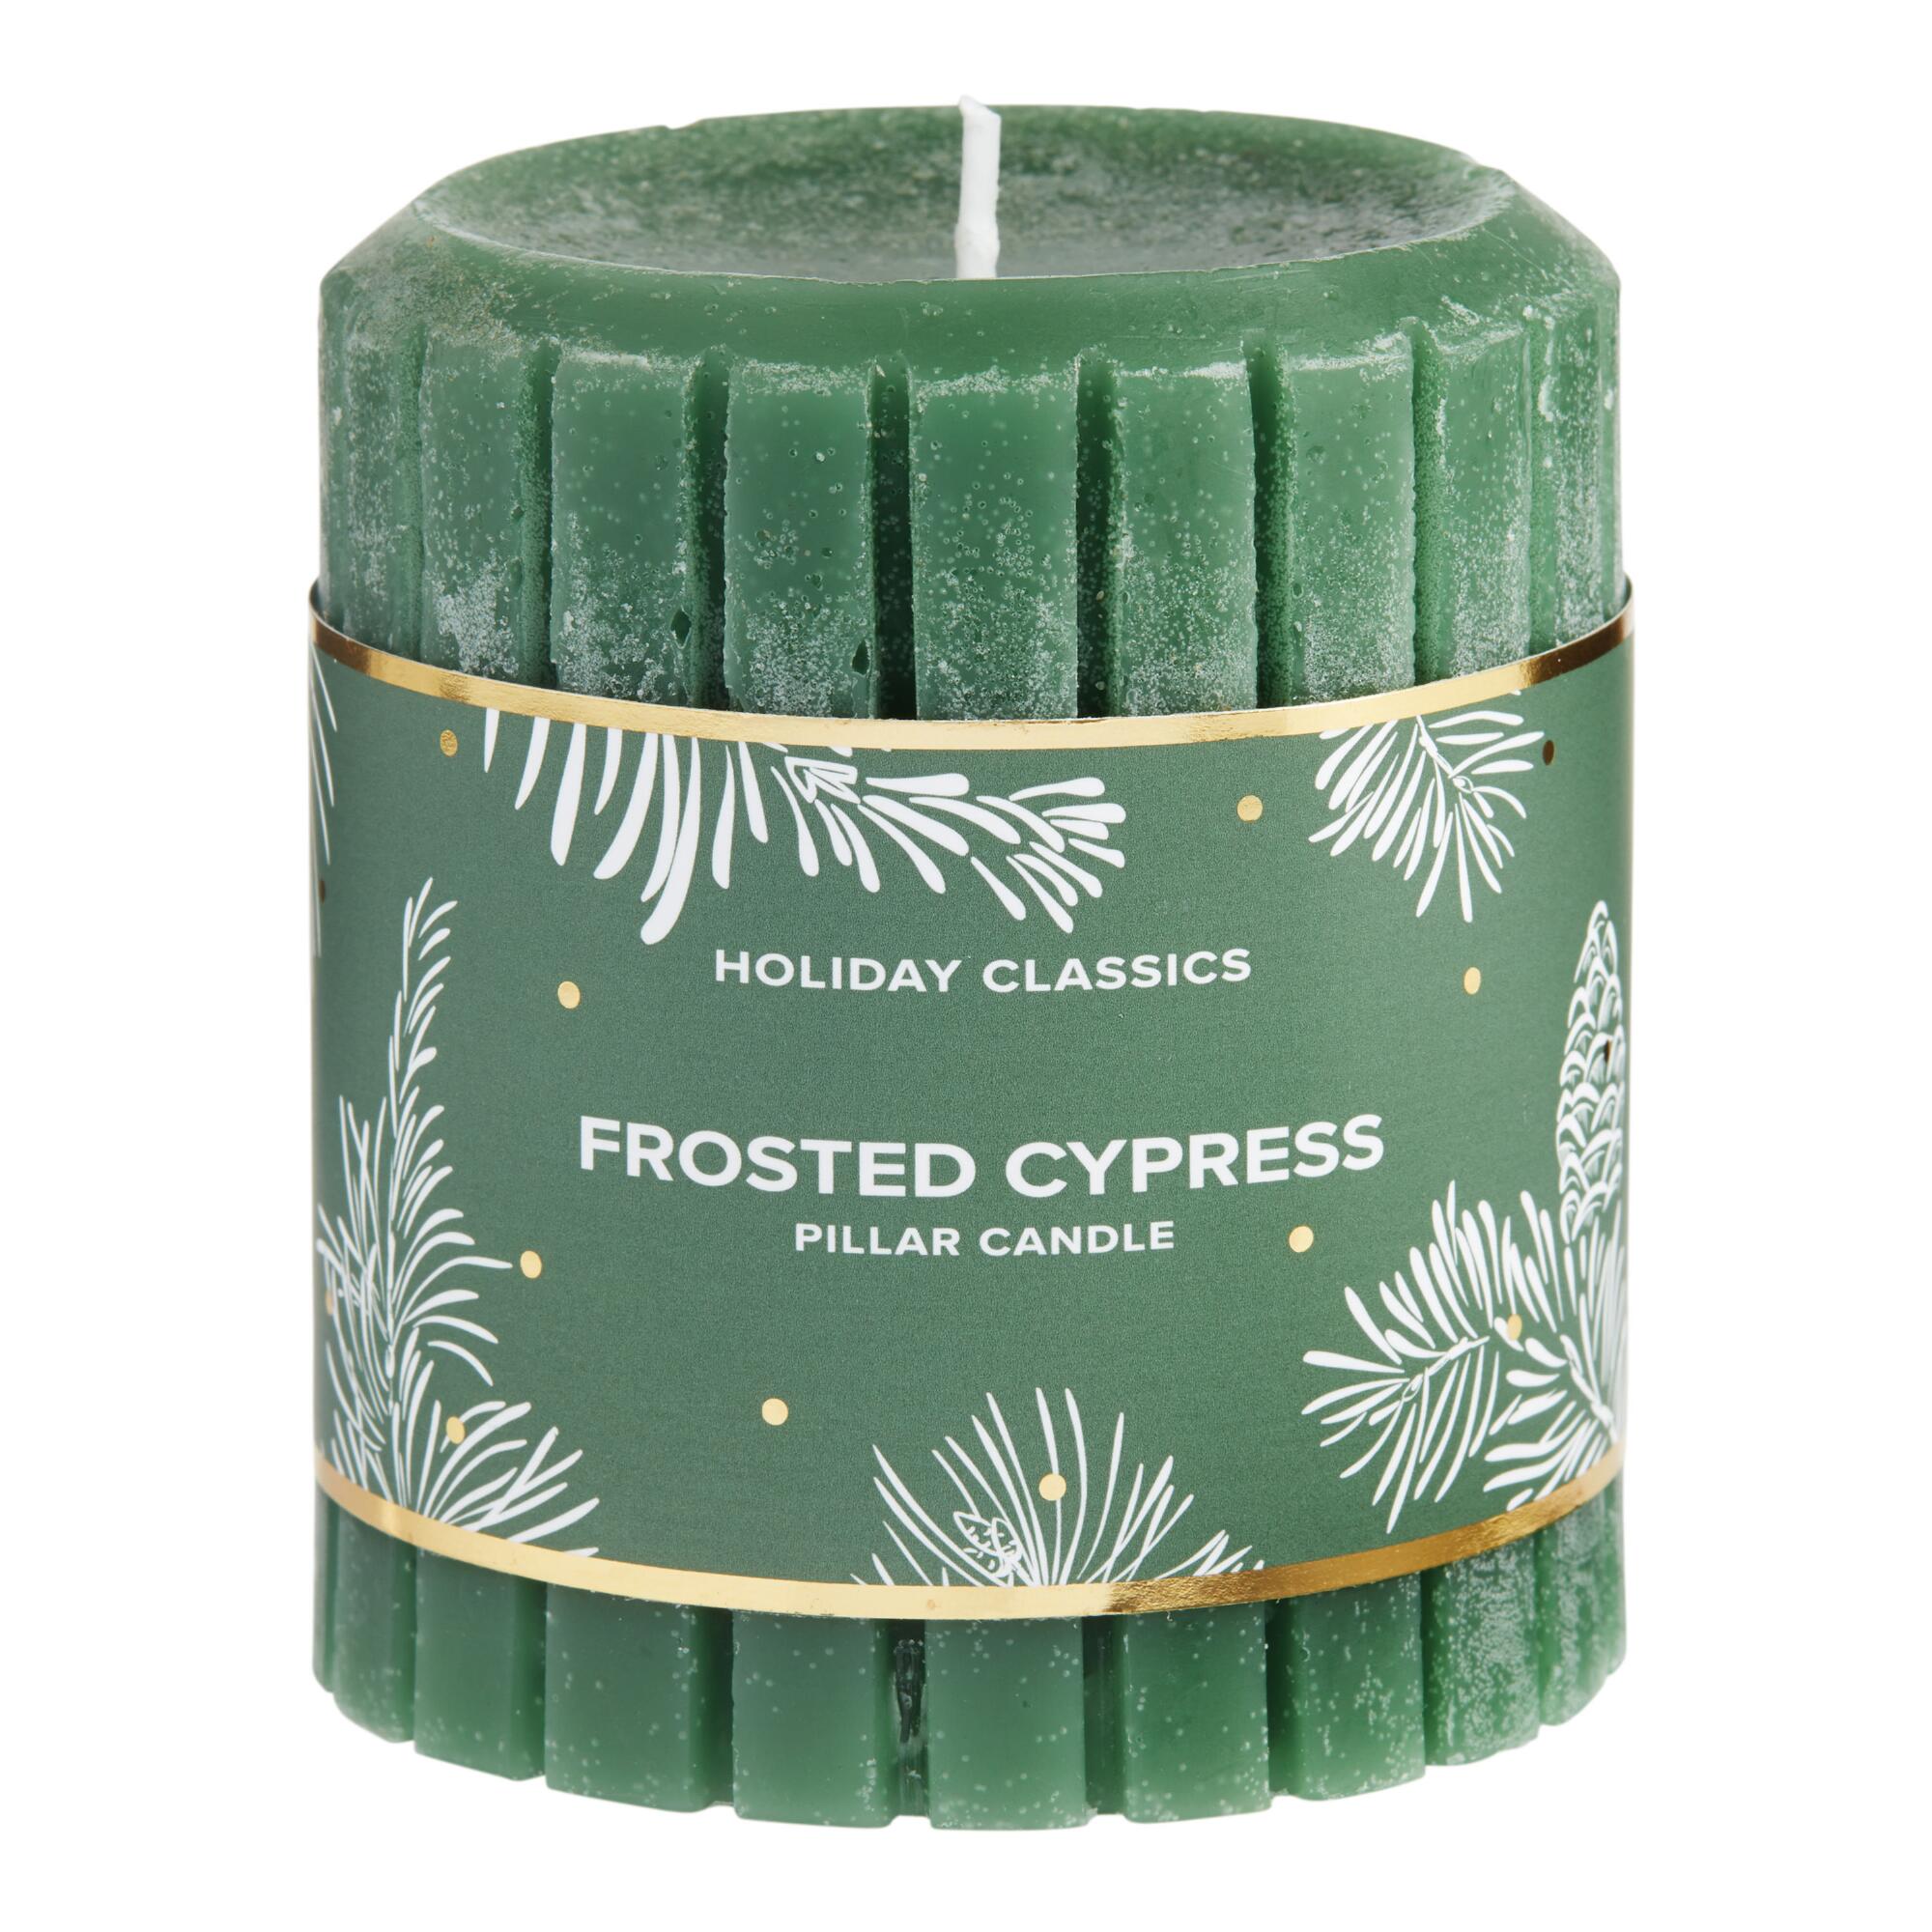 3 Inch Green Frosted Cypress Pillar Candle - Scented Wax by World Market